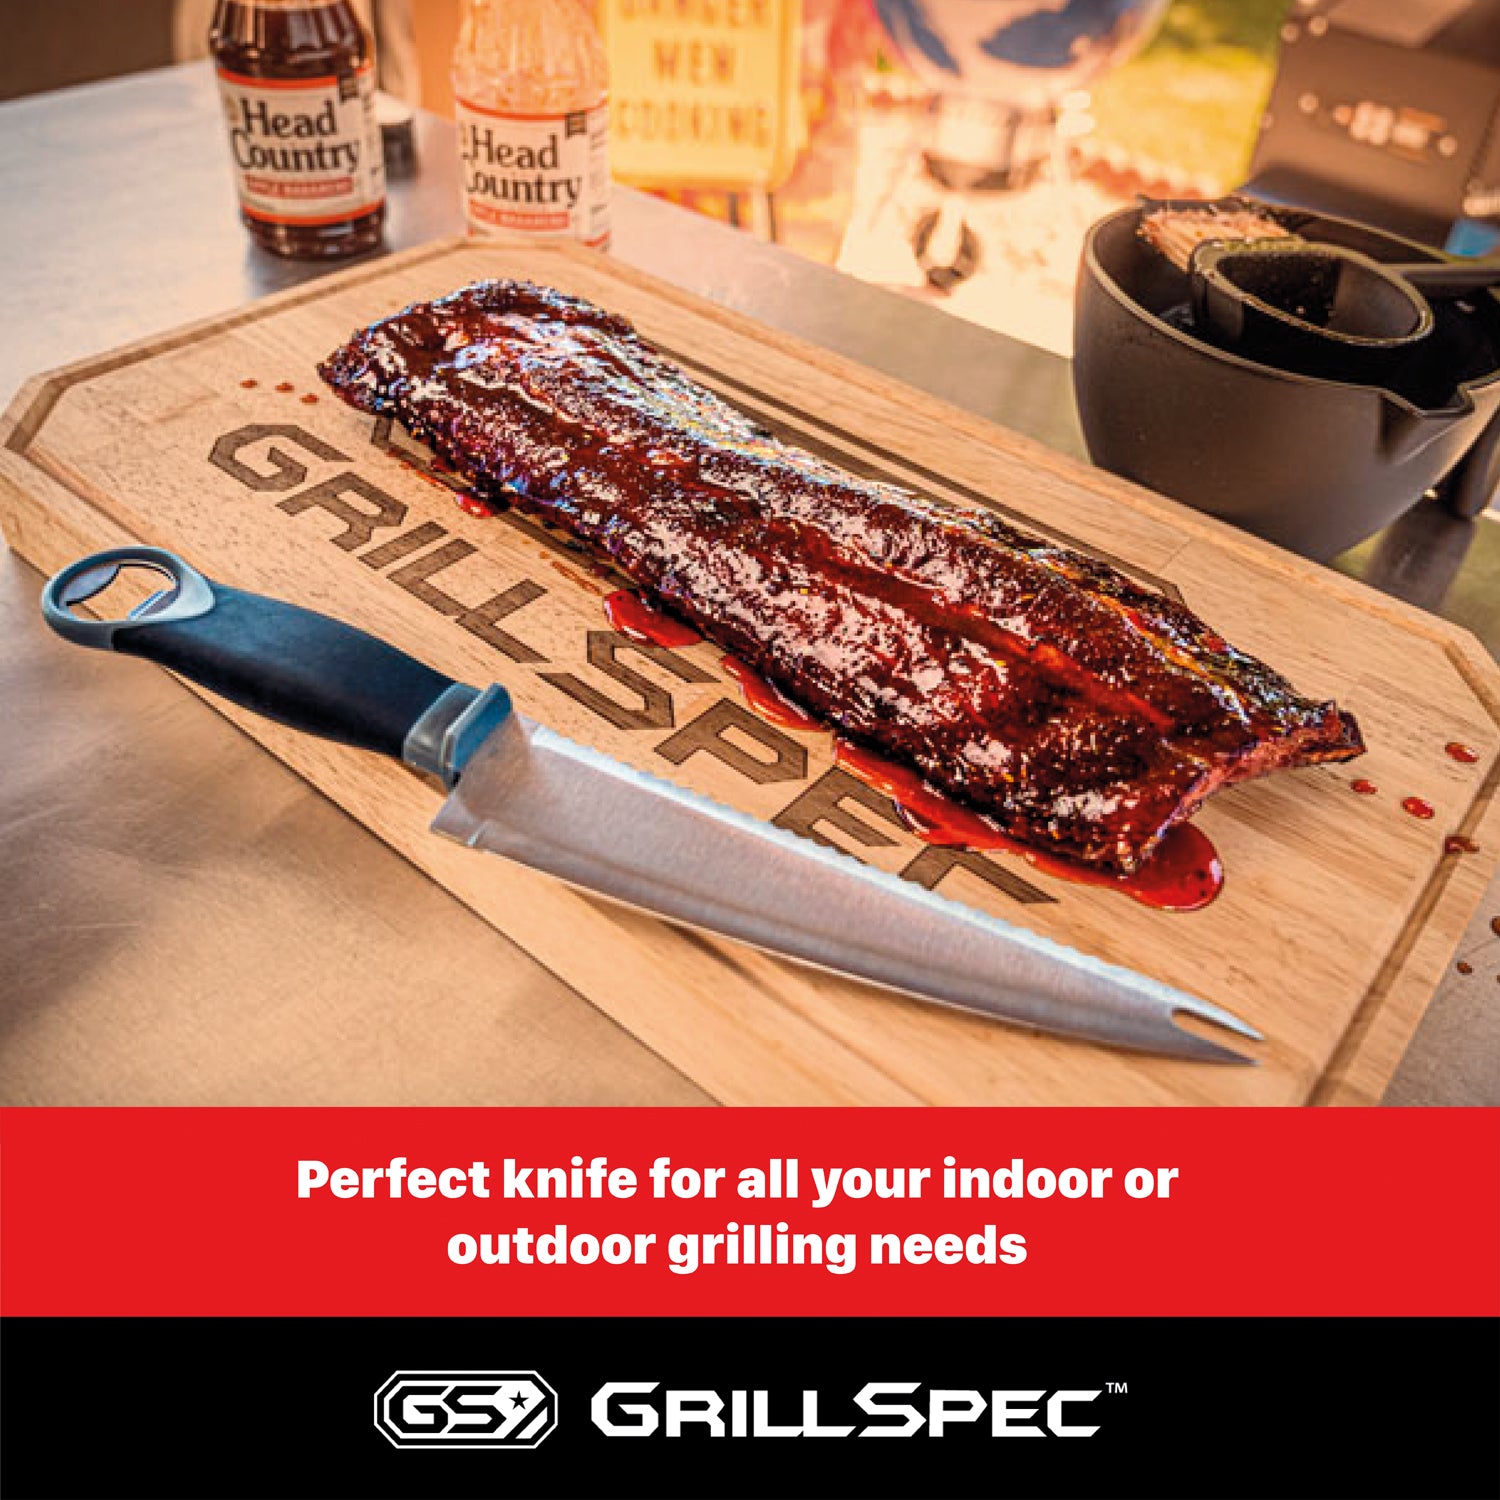 GRILLSPEC Multi-Use Utility Knife with Cover, 8